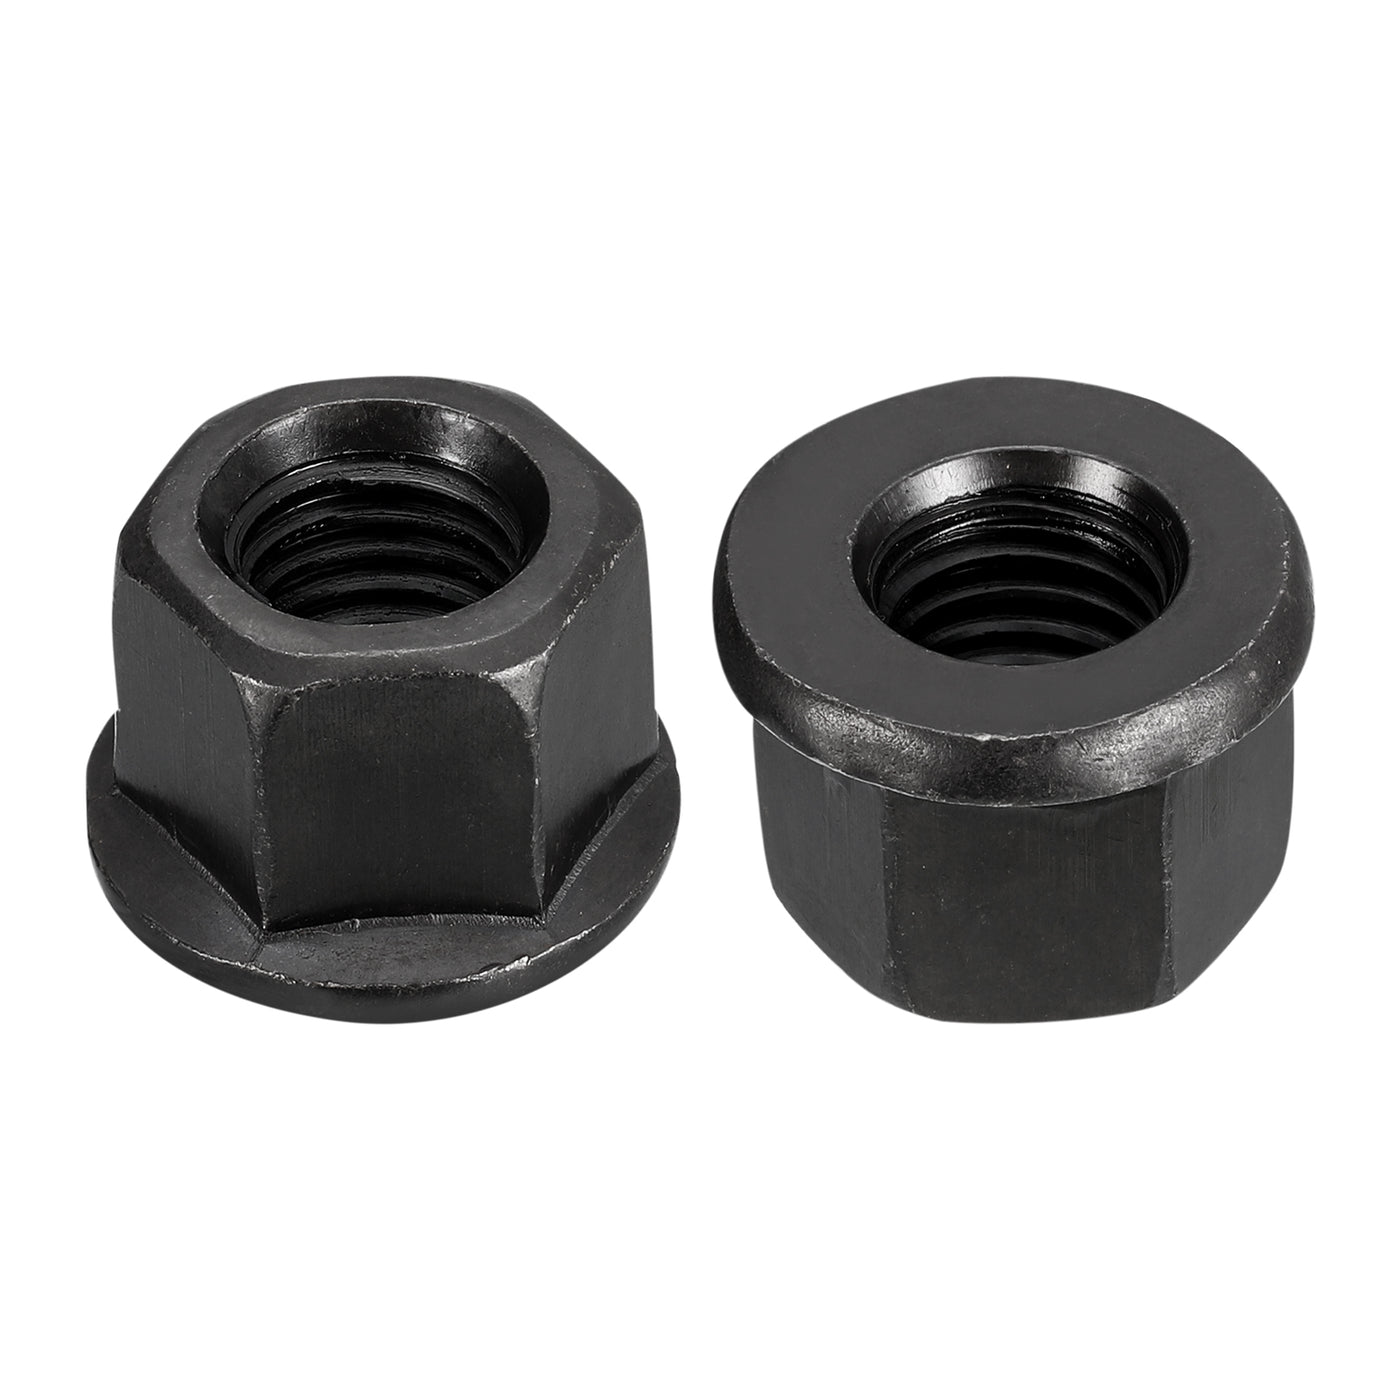 uxcell Uxcell M14 Flange Hex Lock Nuts, 2pcs Grade 10.9 Carbon Steel Hex Flange Nuts